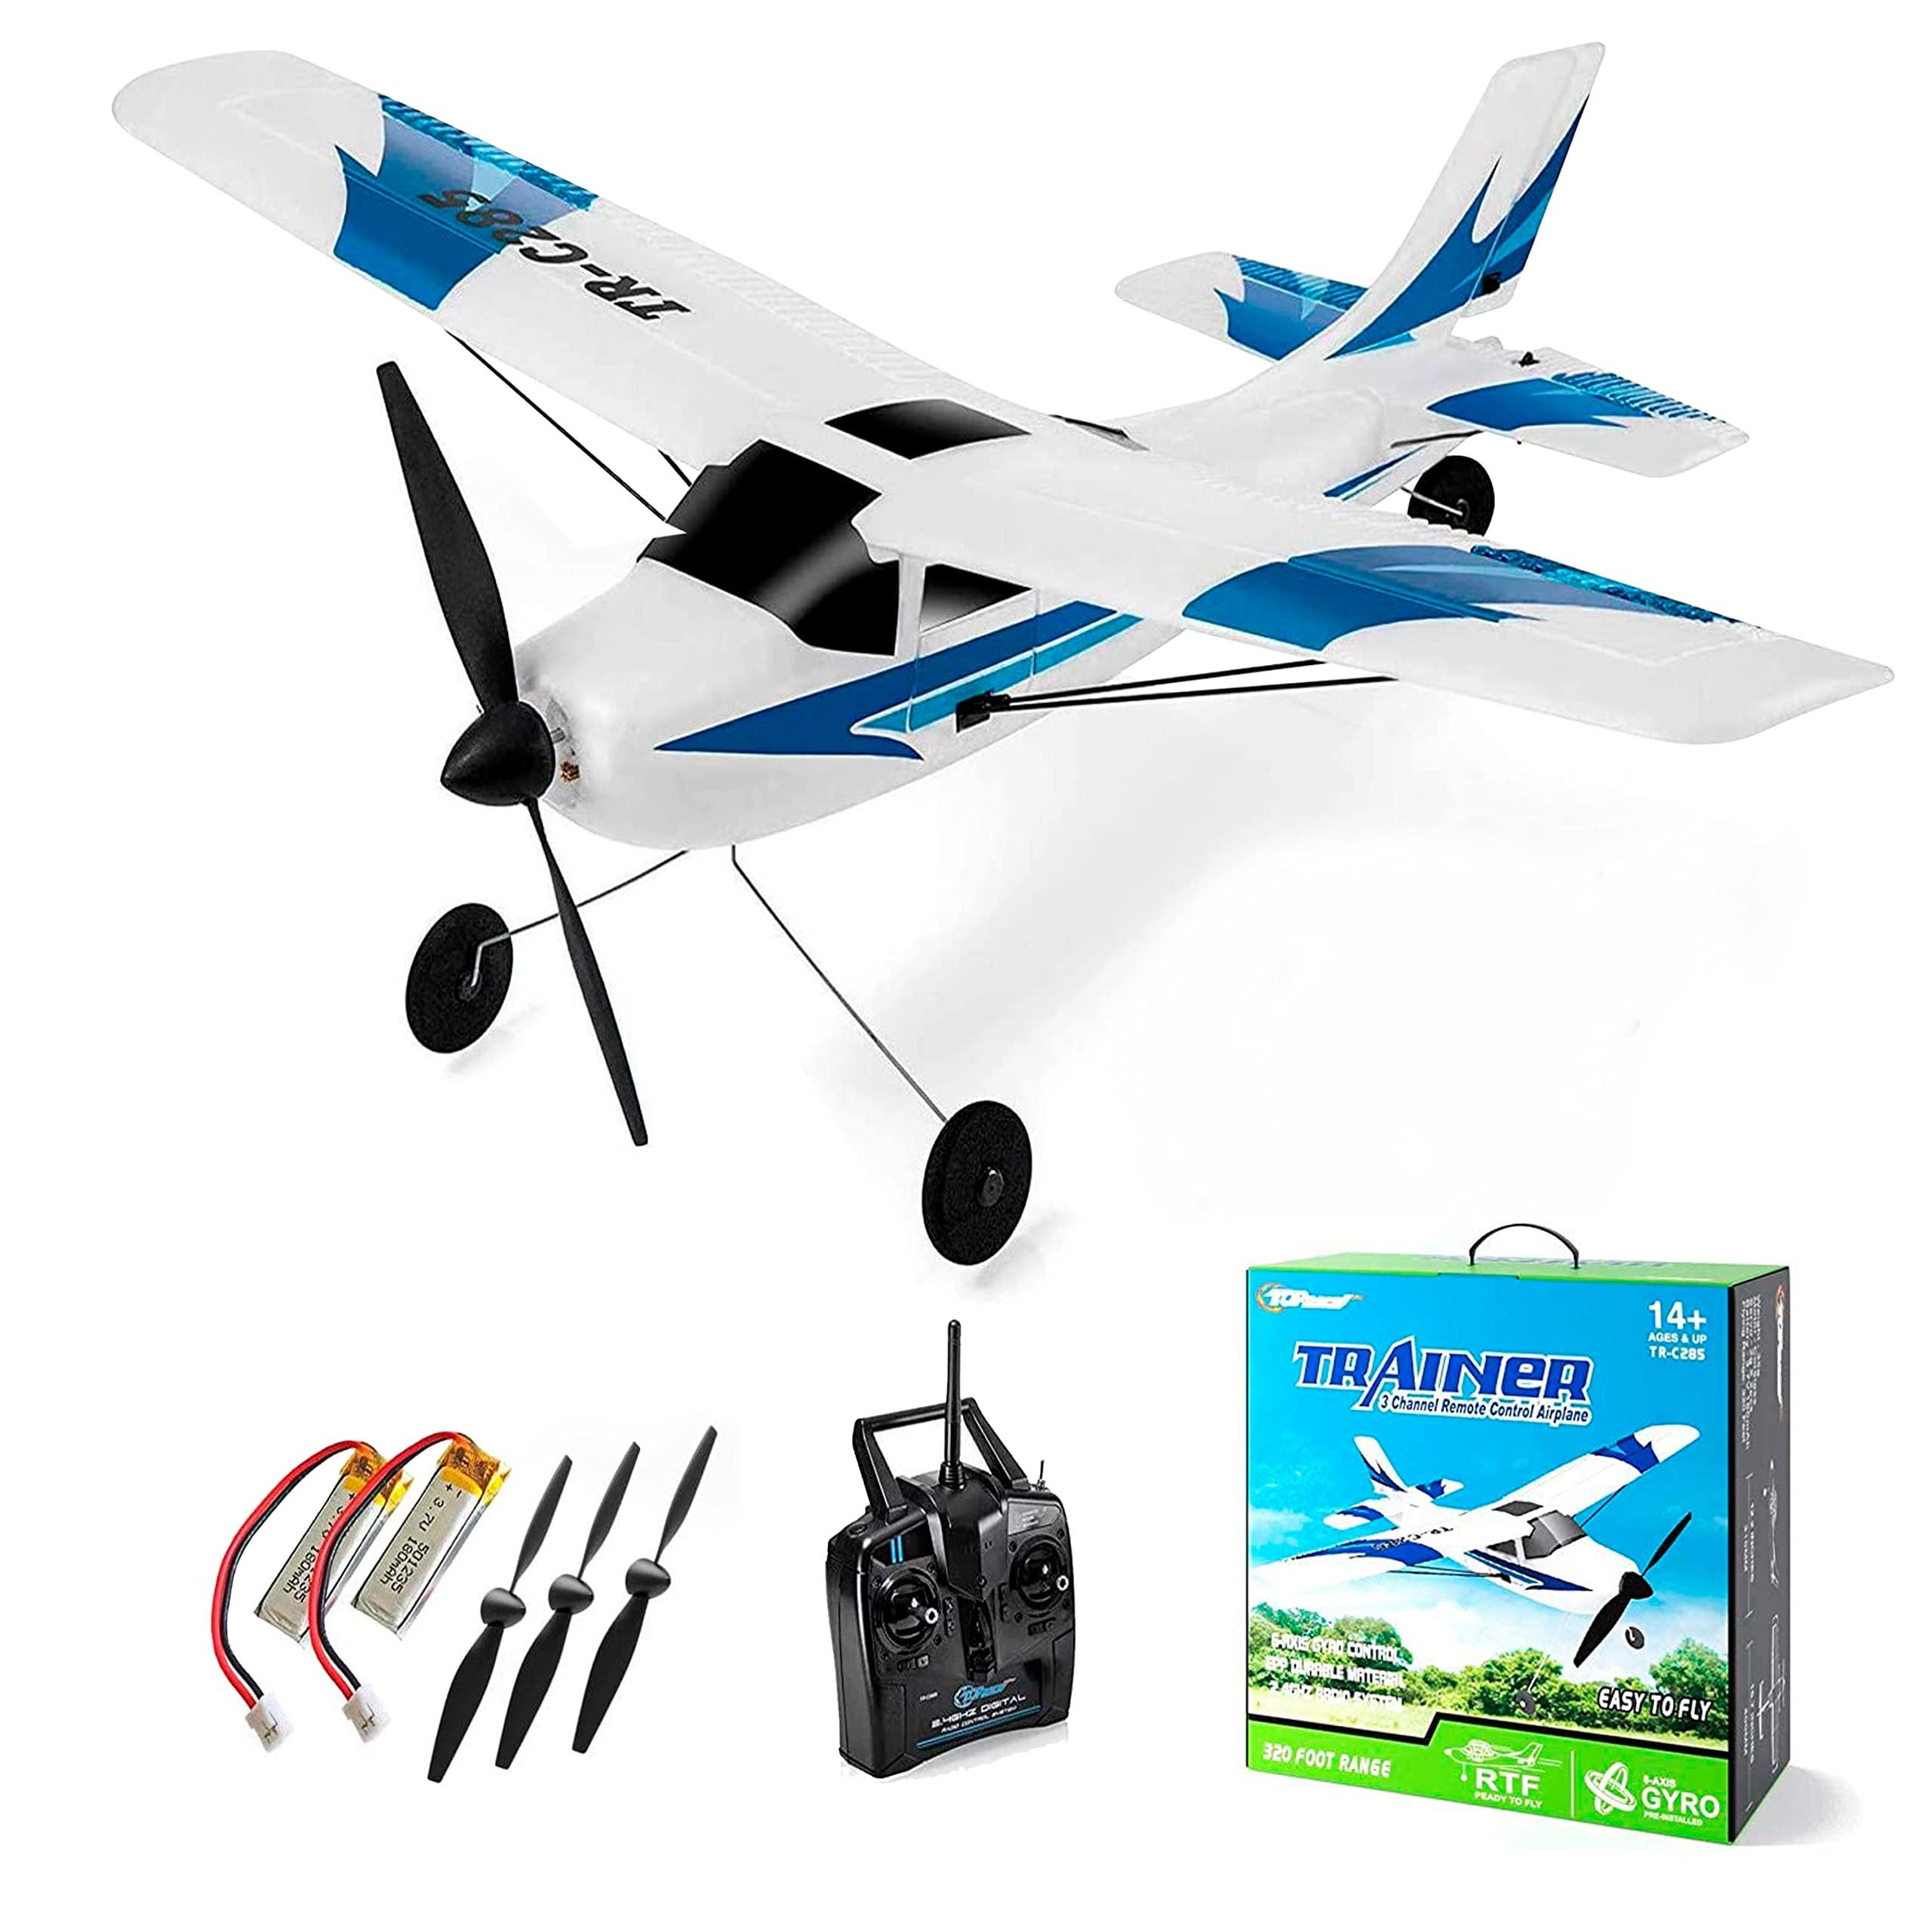 Flying Plane With Remote Control: Common Issues and Troubleshooting Tips for Remote-Controlled Flying Planes